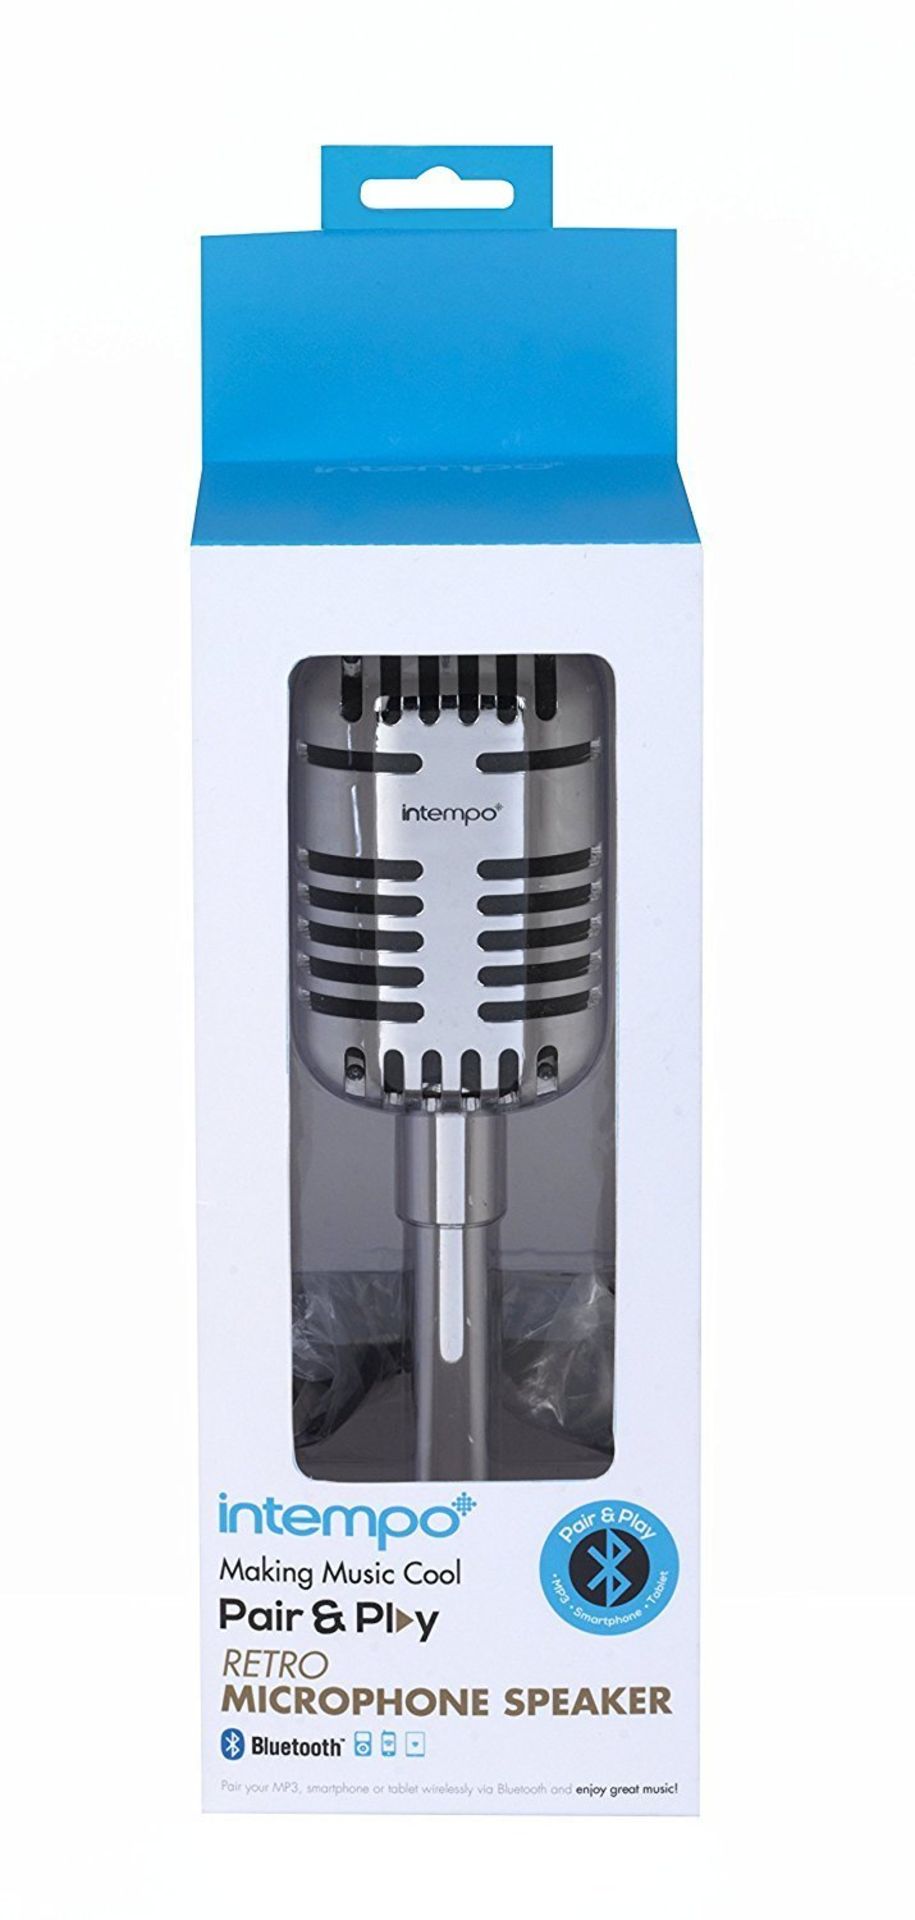 + VAT Brand New Bluetooth Portable Microphone Speaker From Intempo - Built-In Microphone - Charging - Image 3 of 3